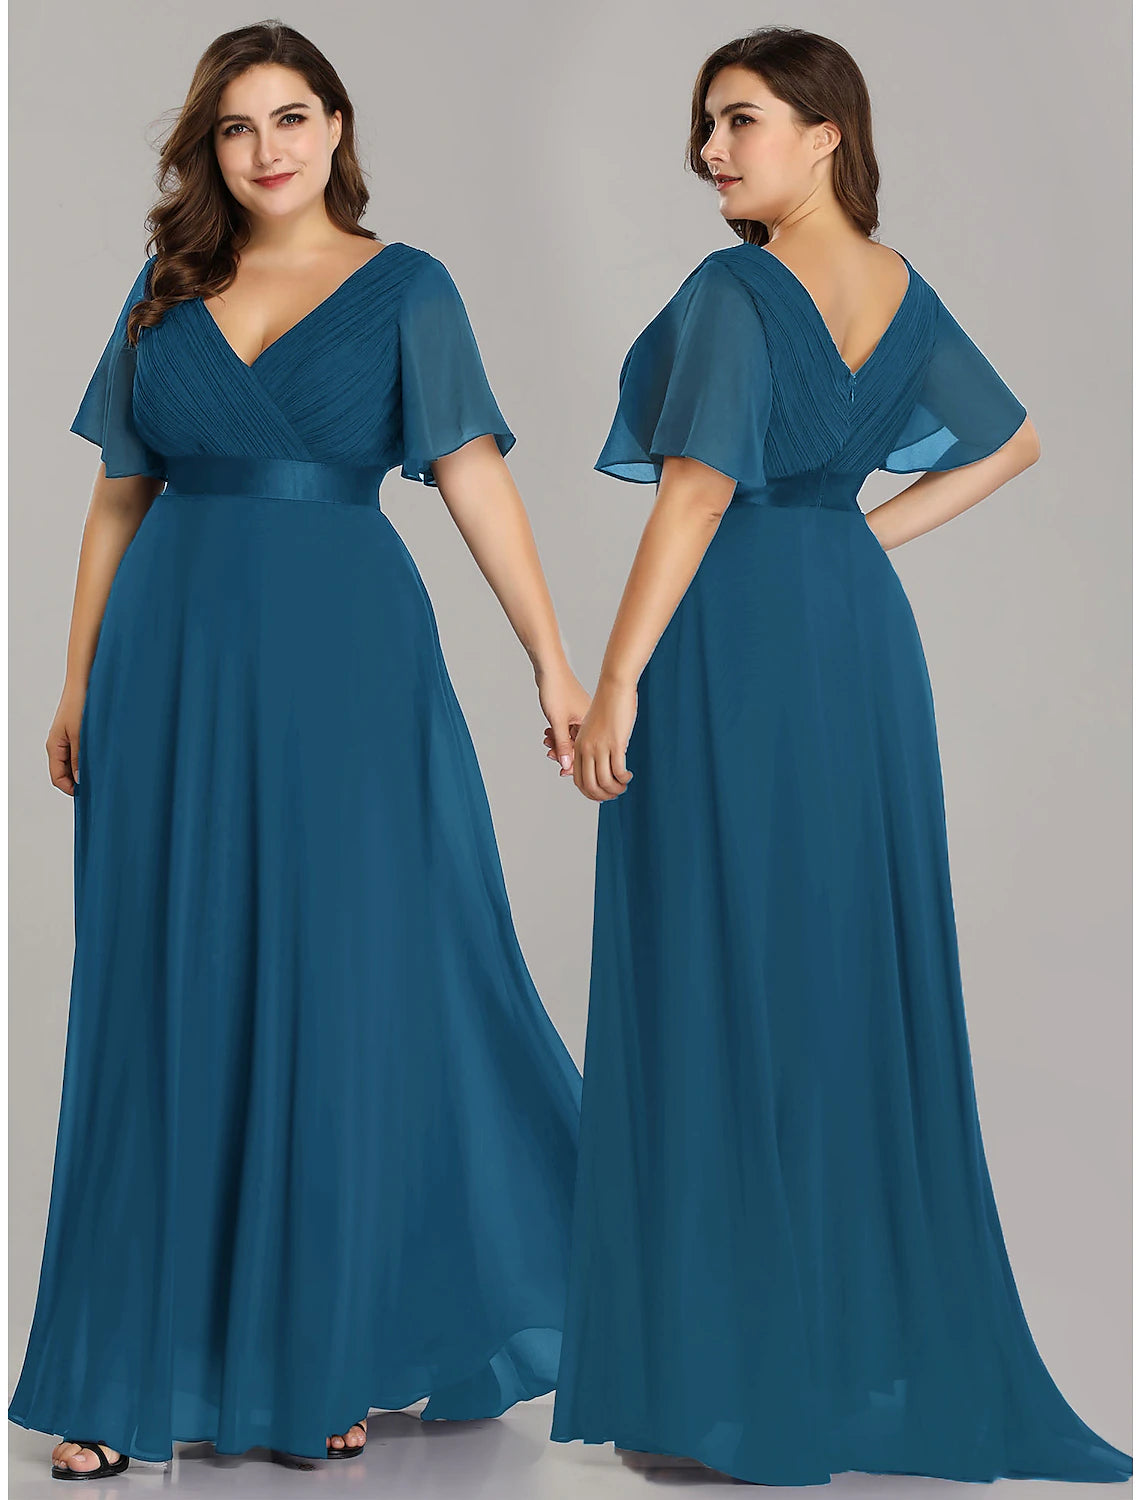 Wholesale A-Line Empire Fall Wedding Guest Dress For Bridesmaid Plus S ...